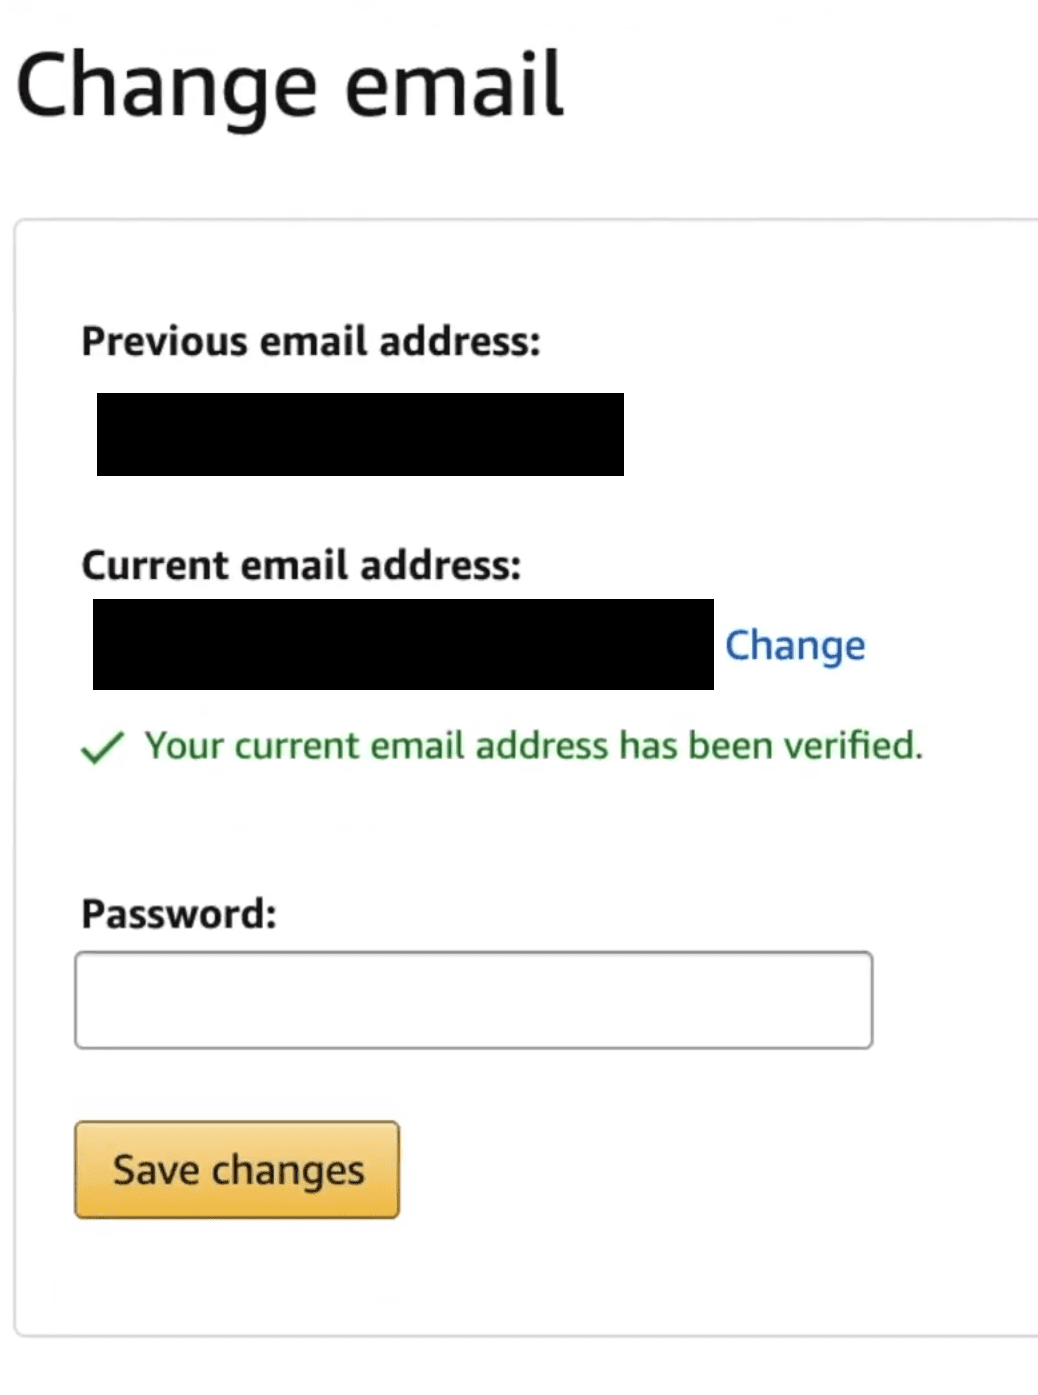 Amazon: How to Change the Email Address on Your Account - Technipages